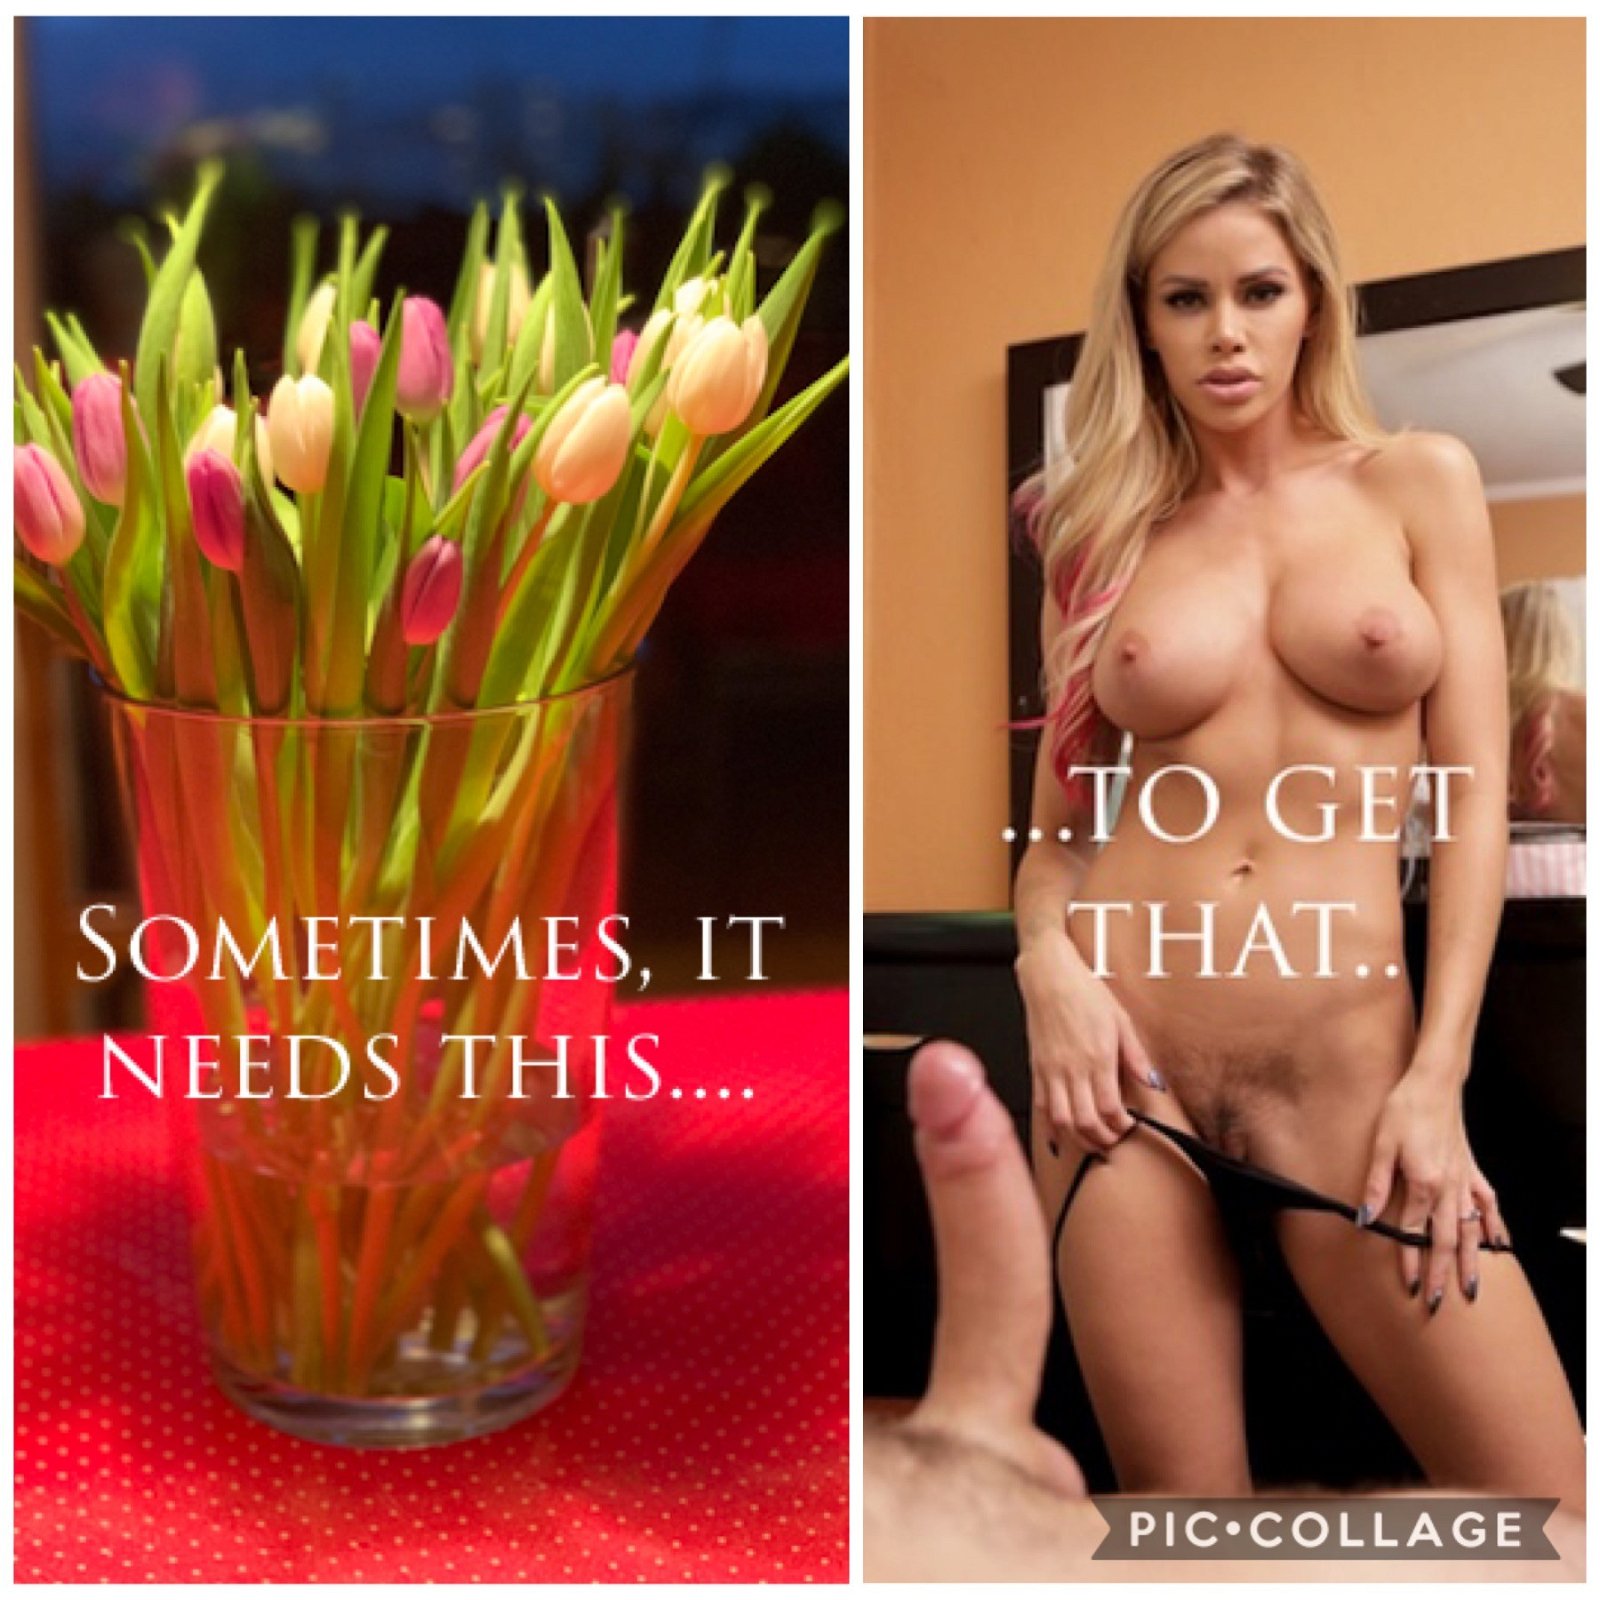 Photo by my-hidden-garden with the username @my-hidden-garden,  March 1, 2020 at 9:32 AM. The post is about the topic FEMDOM WORSHIP and the text says 'Sometimes it need this, to get that...

#loveher #adoreher #vanishher #worshipher'